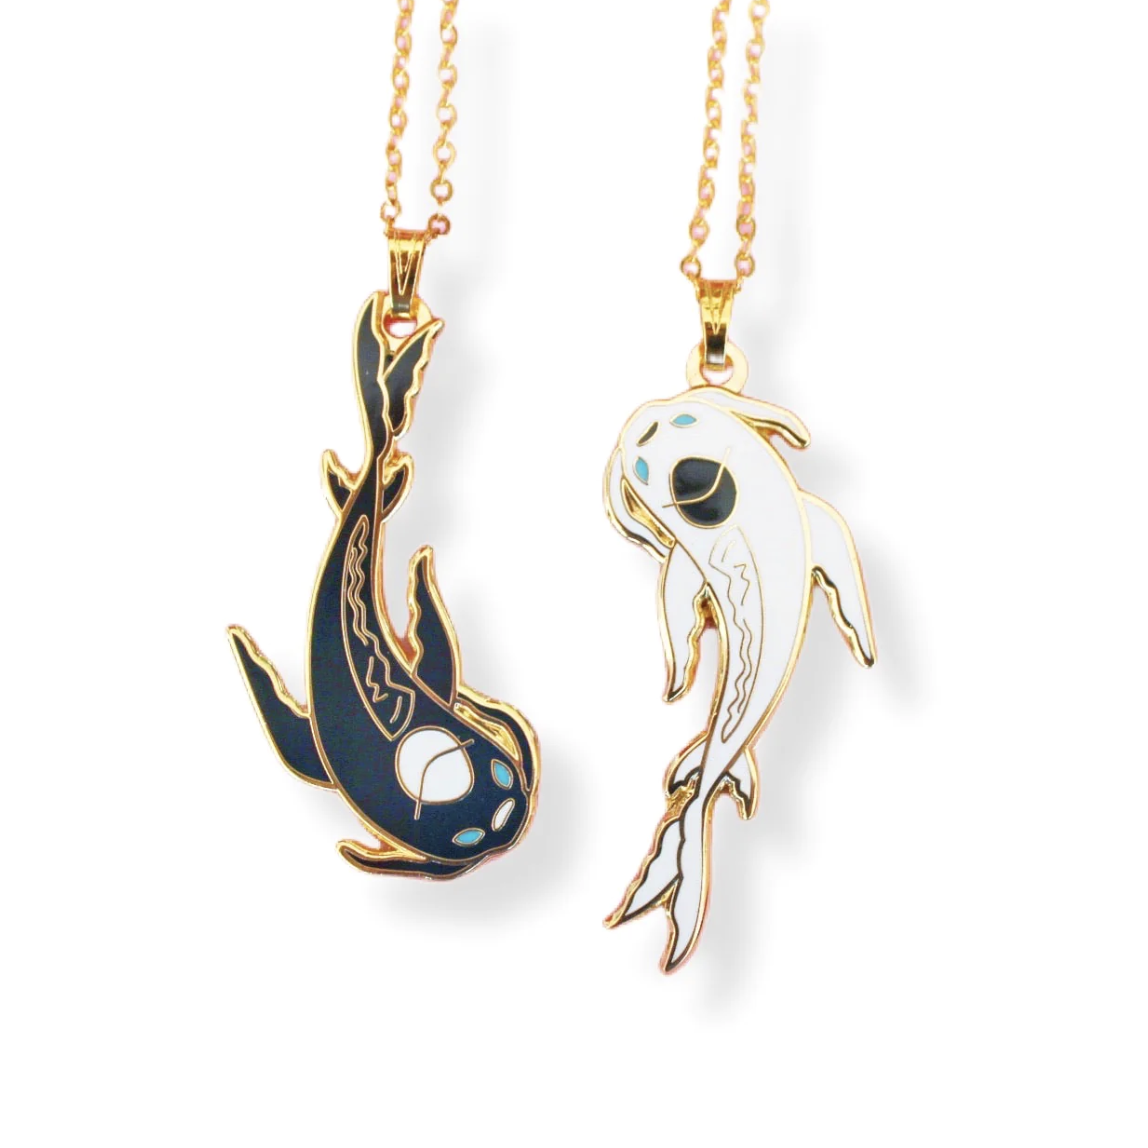 Koi Fish spirits as necklace charms